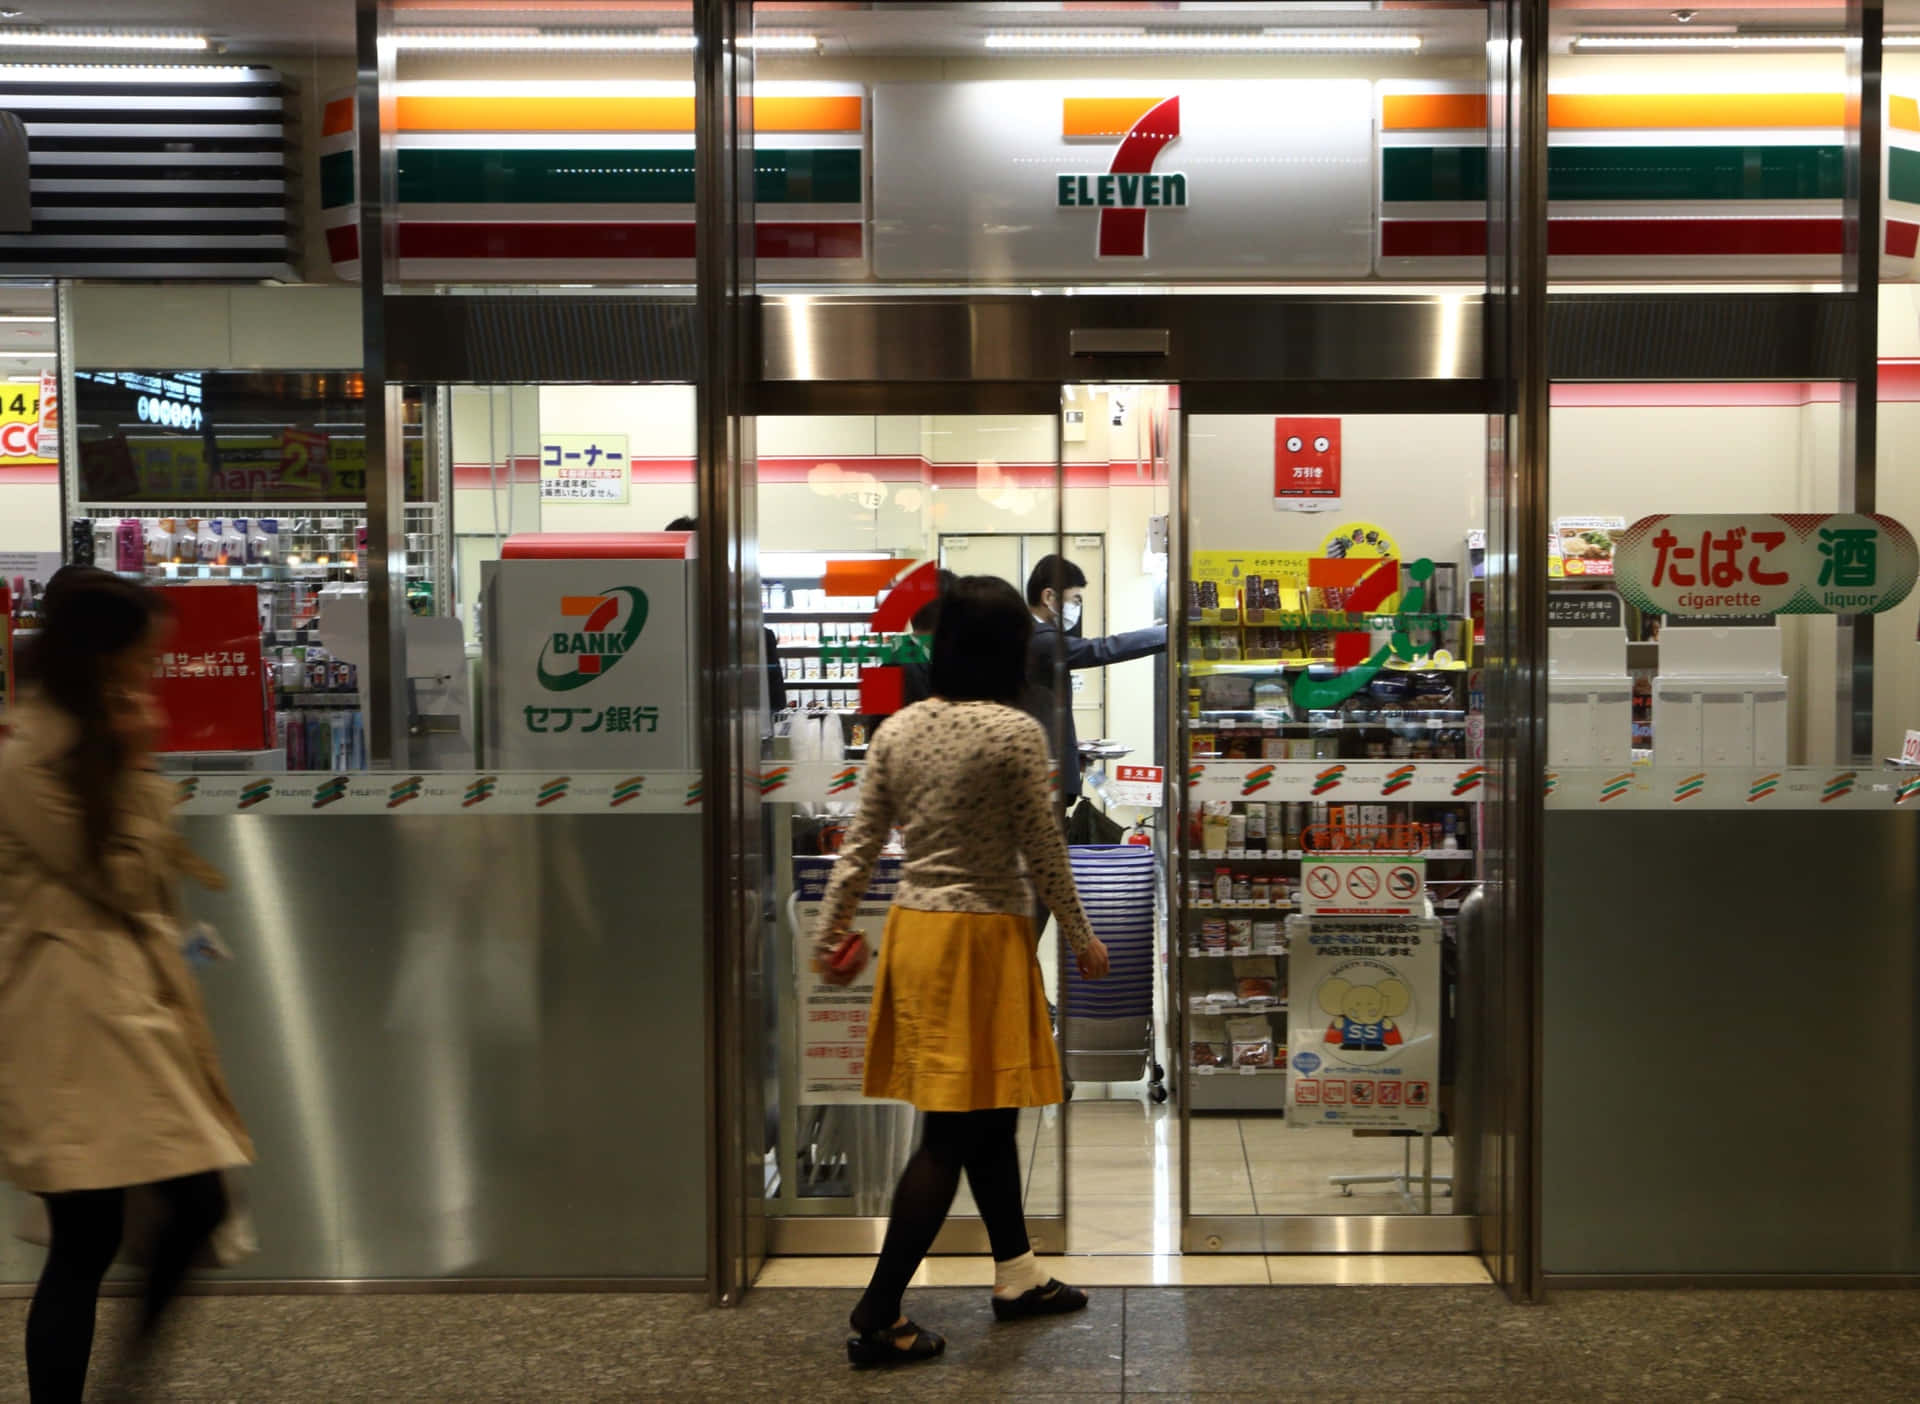 Convenience at Your Fingertips - Enjoy 7 Eleven!